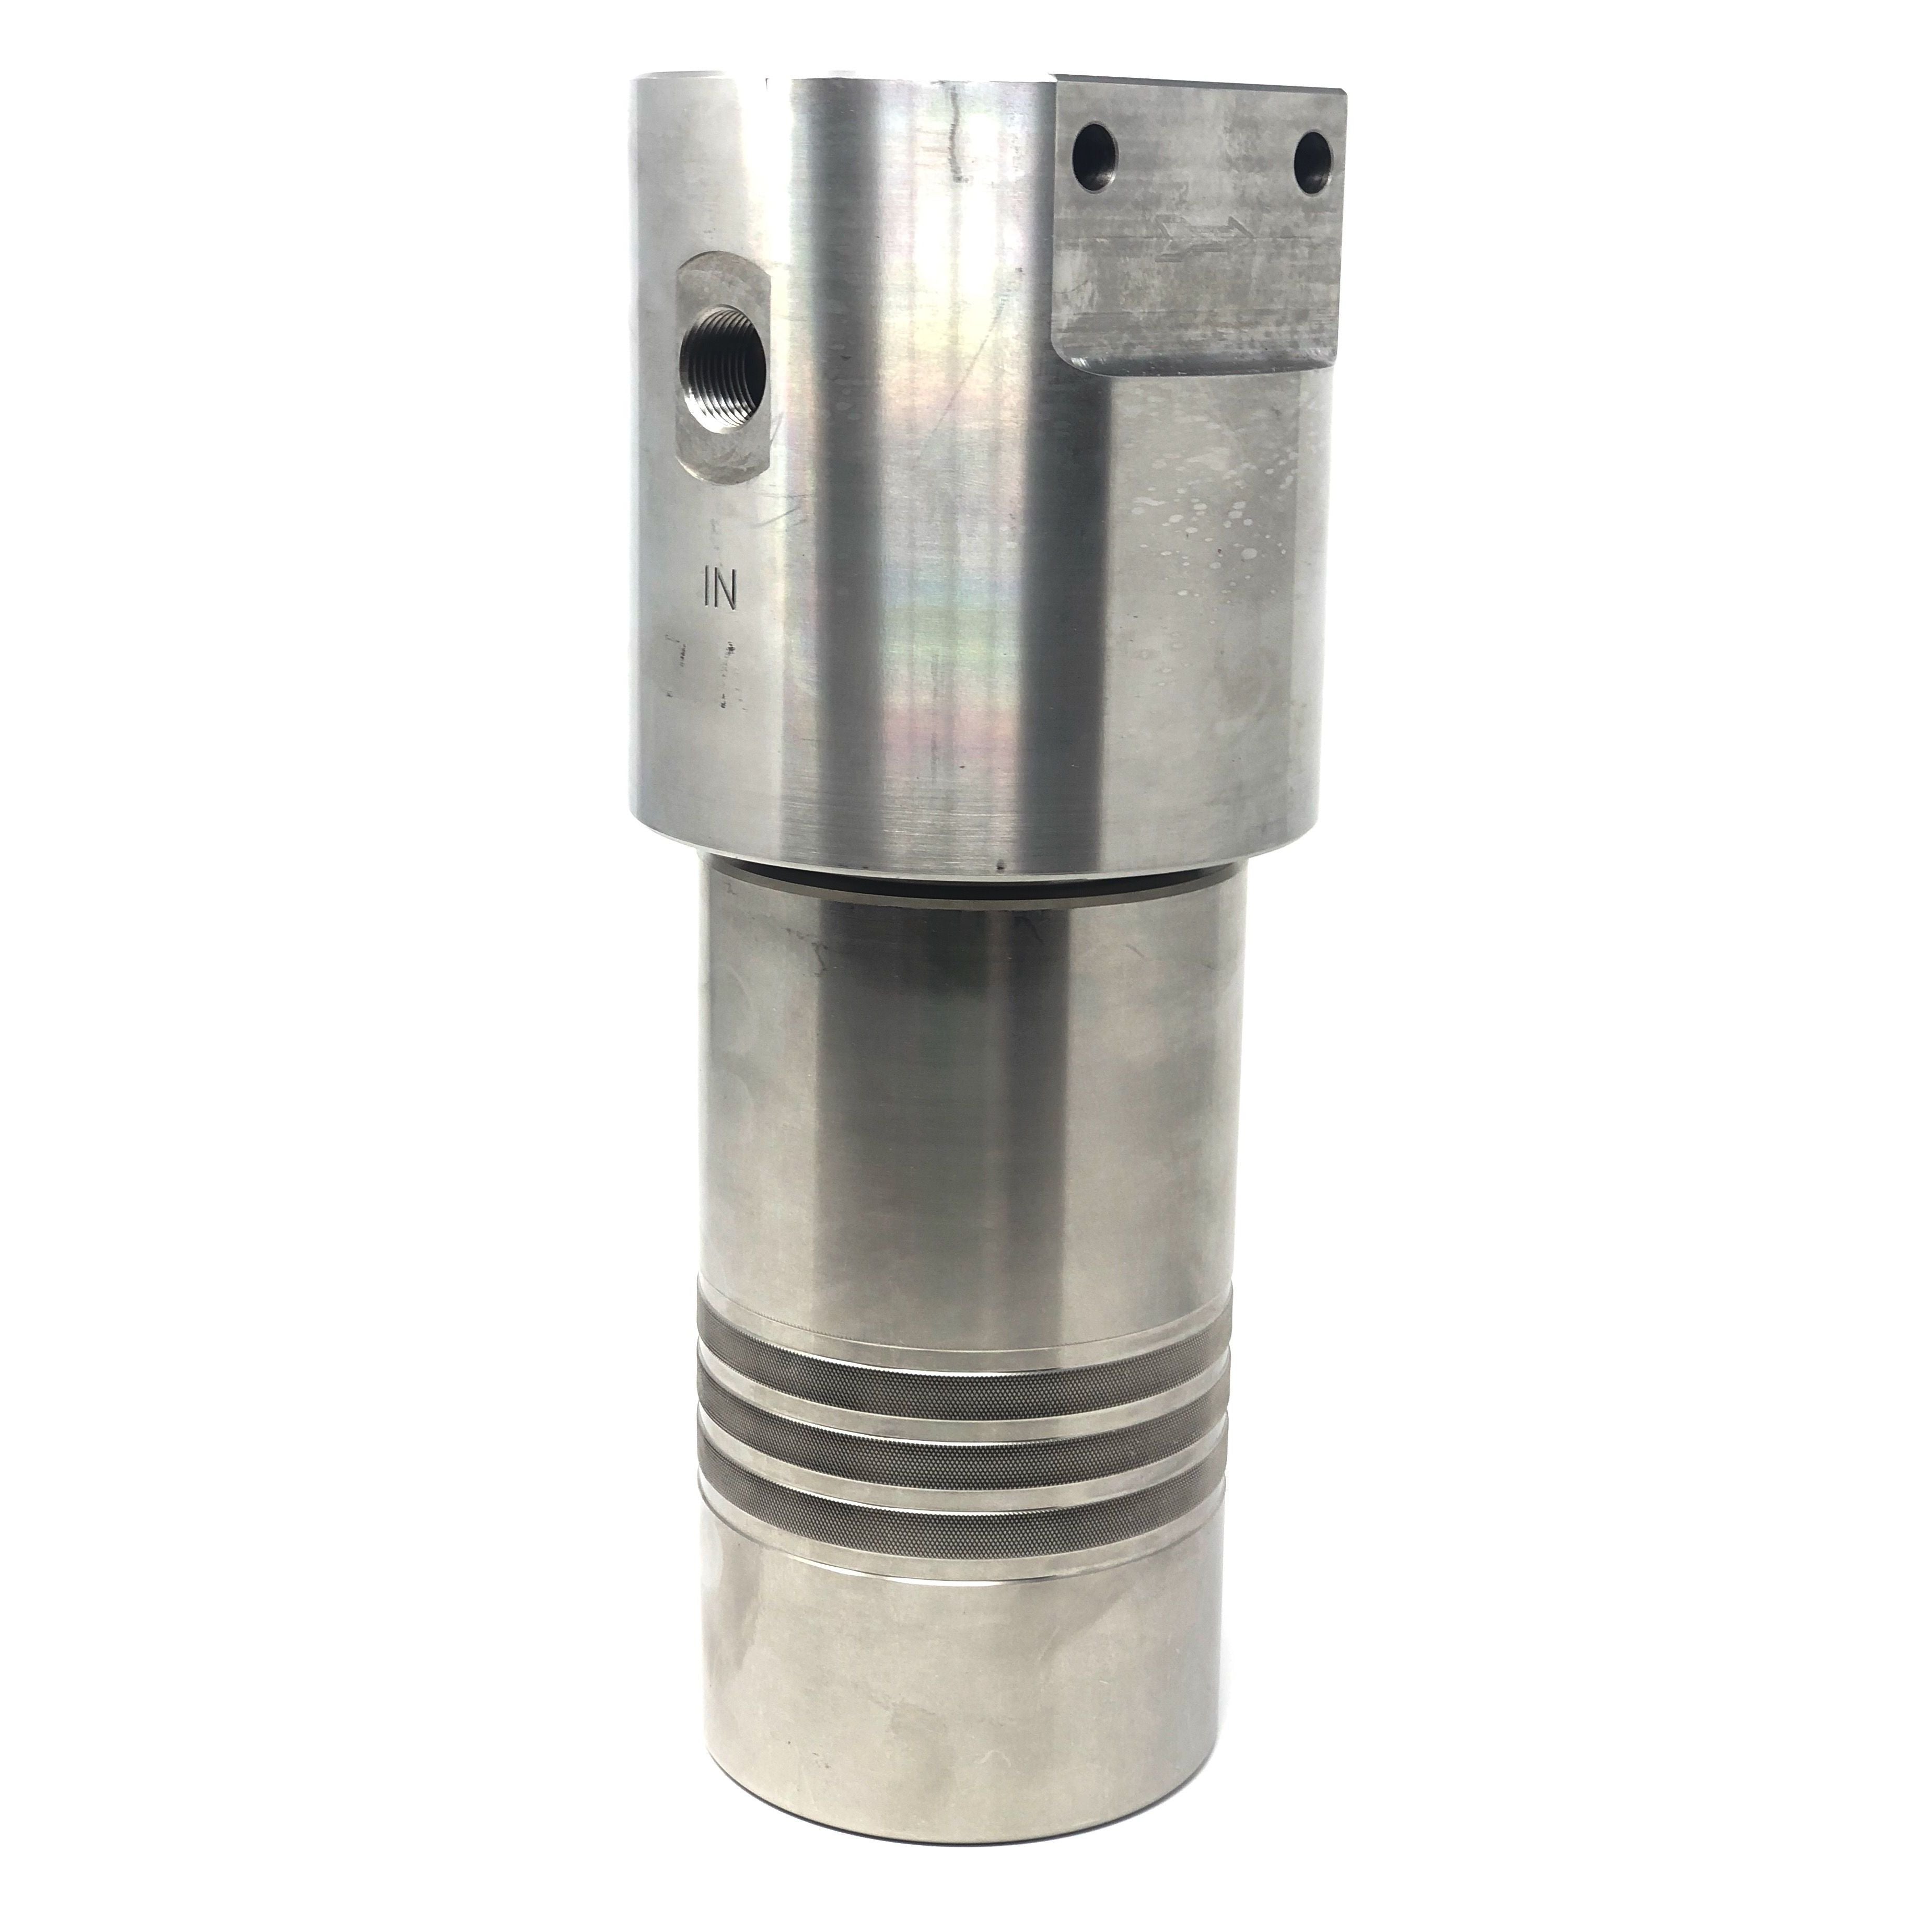 52S-244N-3MDN : Chase Ultra High Pressure Inline Filter, 10000psi, 1/4" NPT, 3 Micron, With Visual Indicator, No Bypass